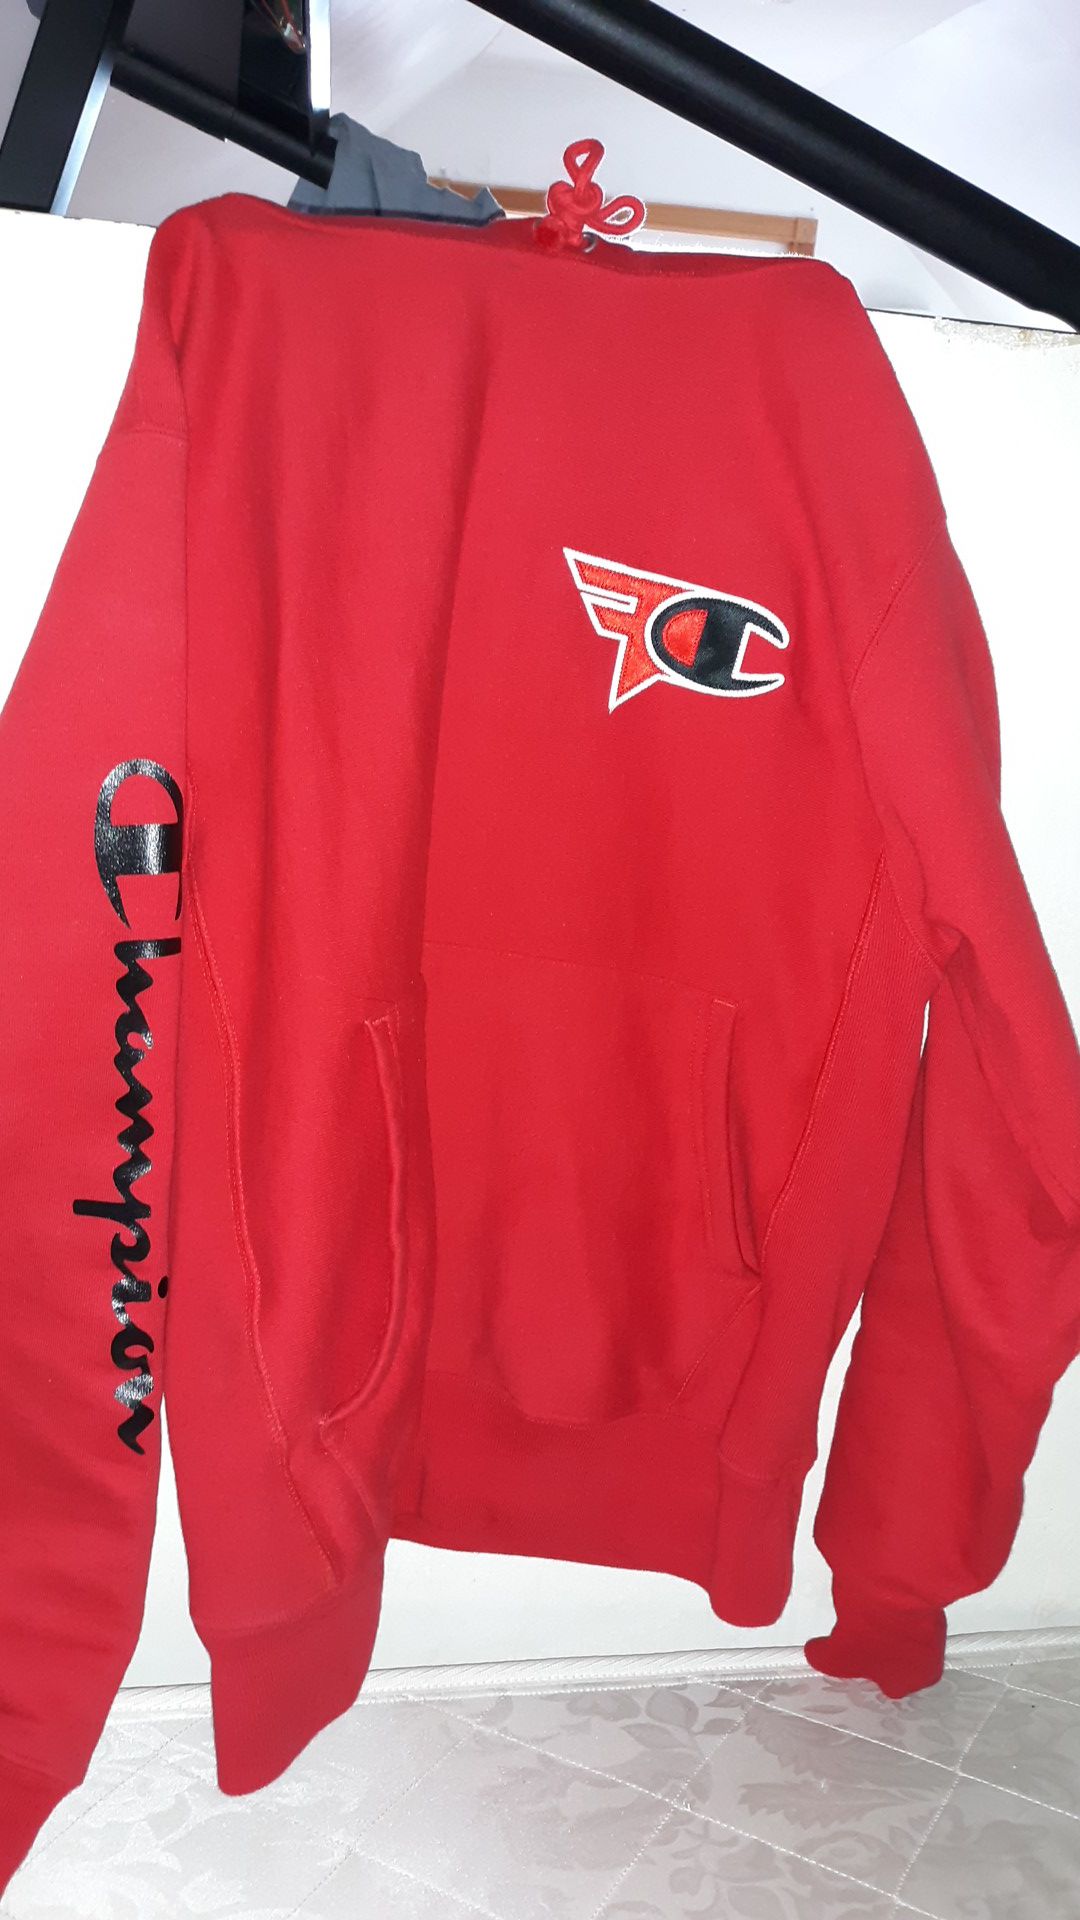 Faze x champion merch size s for Sale in Chicago, IL - OfferUp